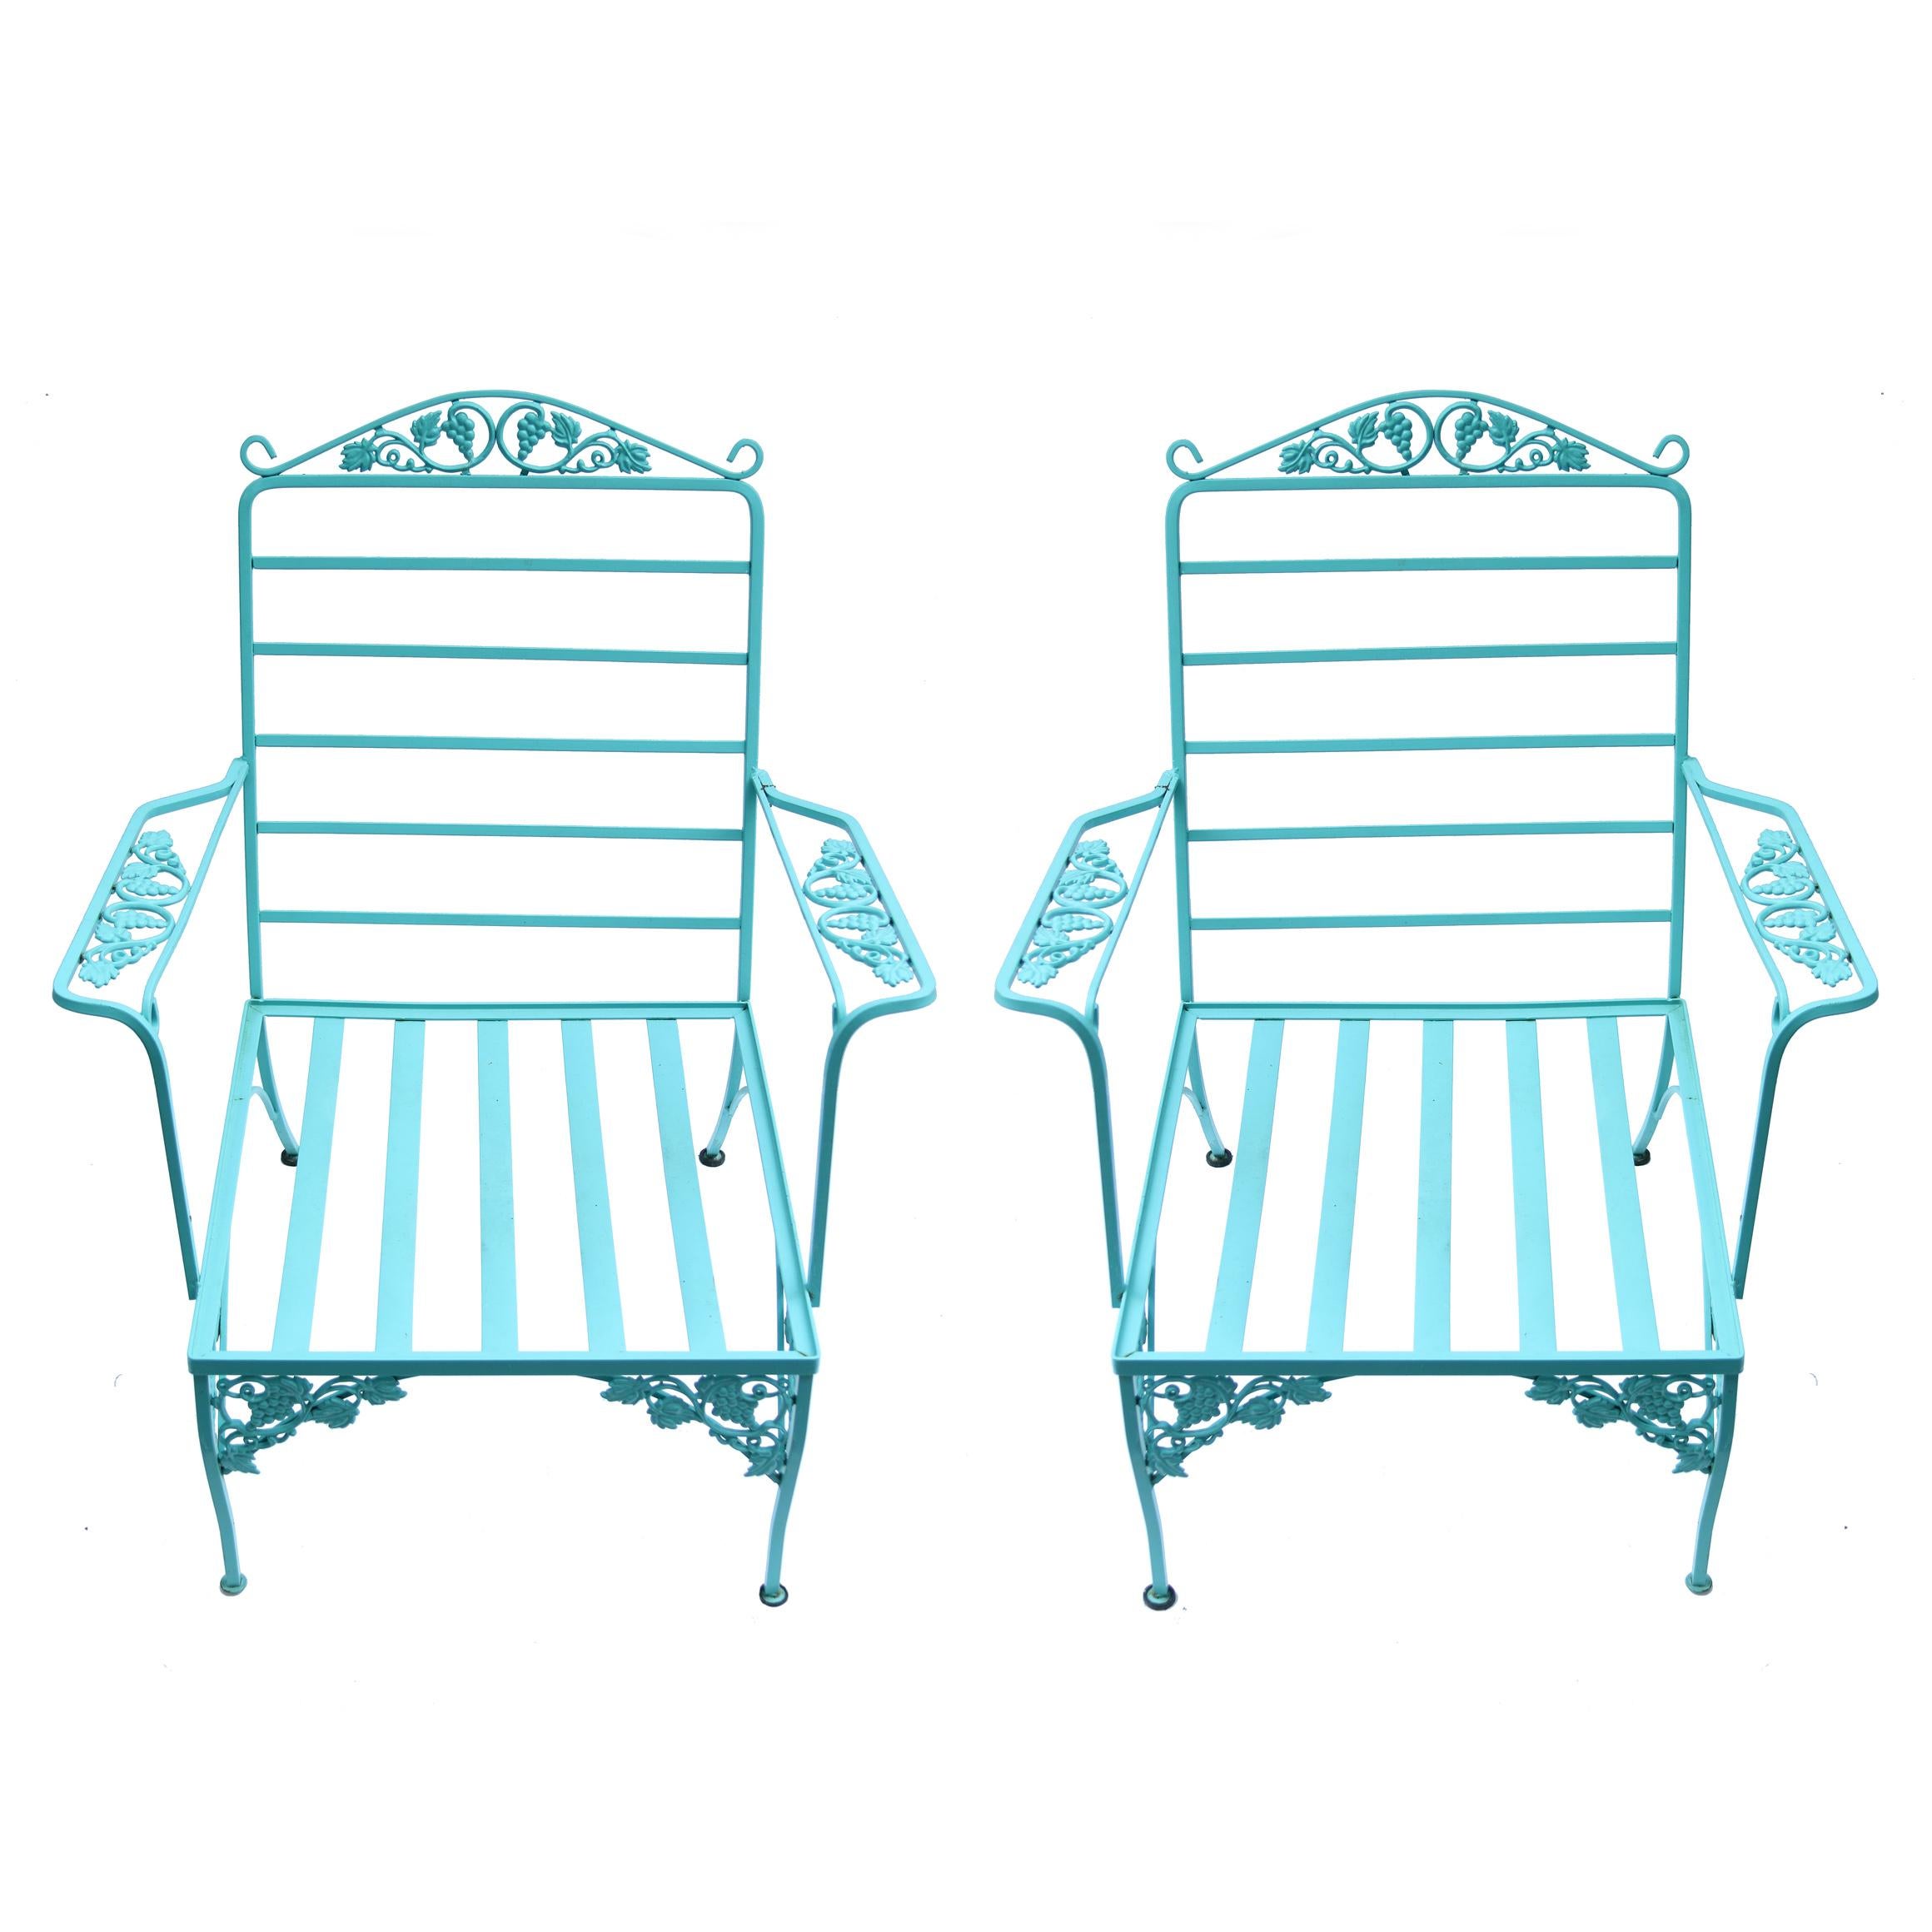 A complete suite of vintage Woodard outdoor furniture in the Salterini style. The turquoise color is stunning and a beautiful complement to a backyard pool patio or deck. The set includes two lounge chairs, two side armchairs, a sofa frame, a coffee